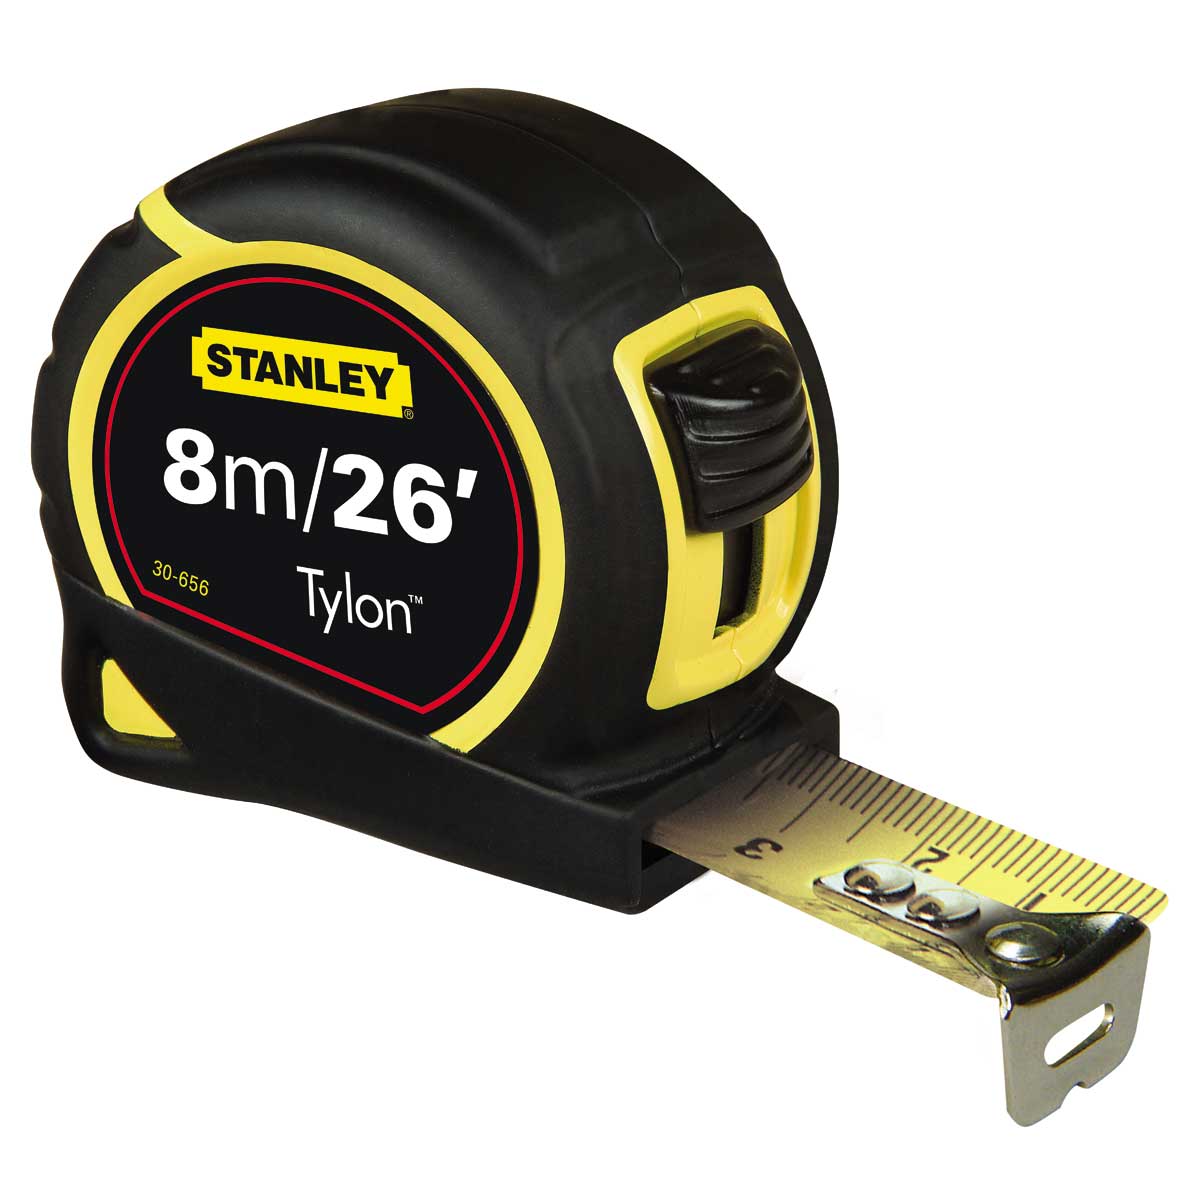 STANLEY 36-195 STELL TYLON MEASURING TAPE 8M/26Ft - Click Image to Close